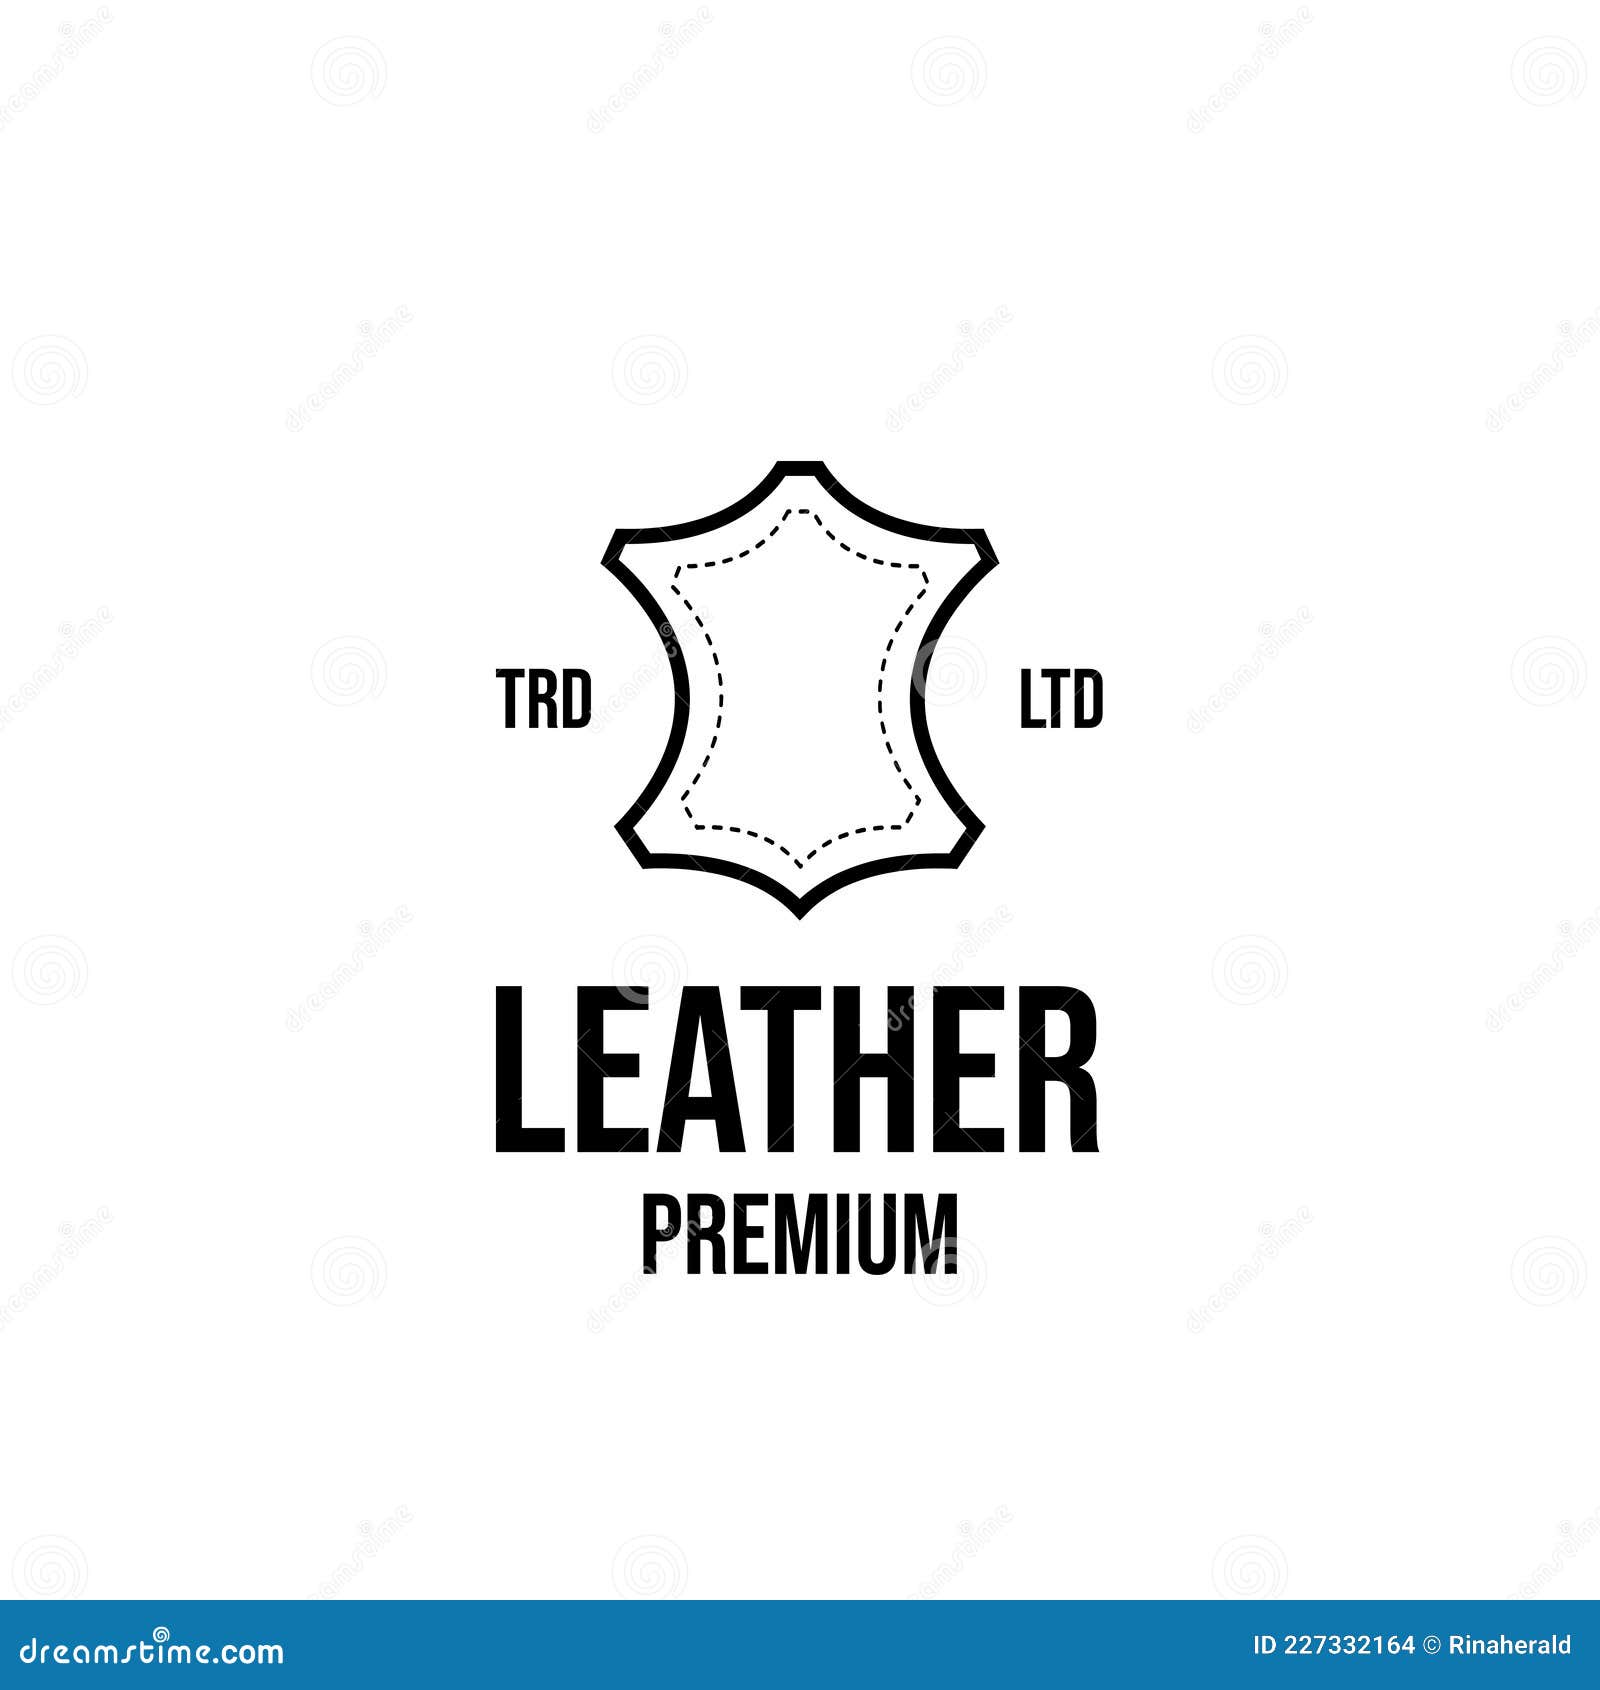 leather-craft-logo-icon-design-stock-vector-illustration-of-graphic